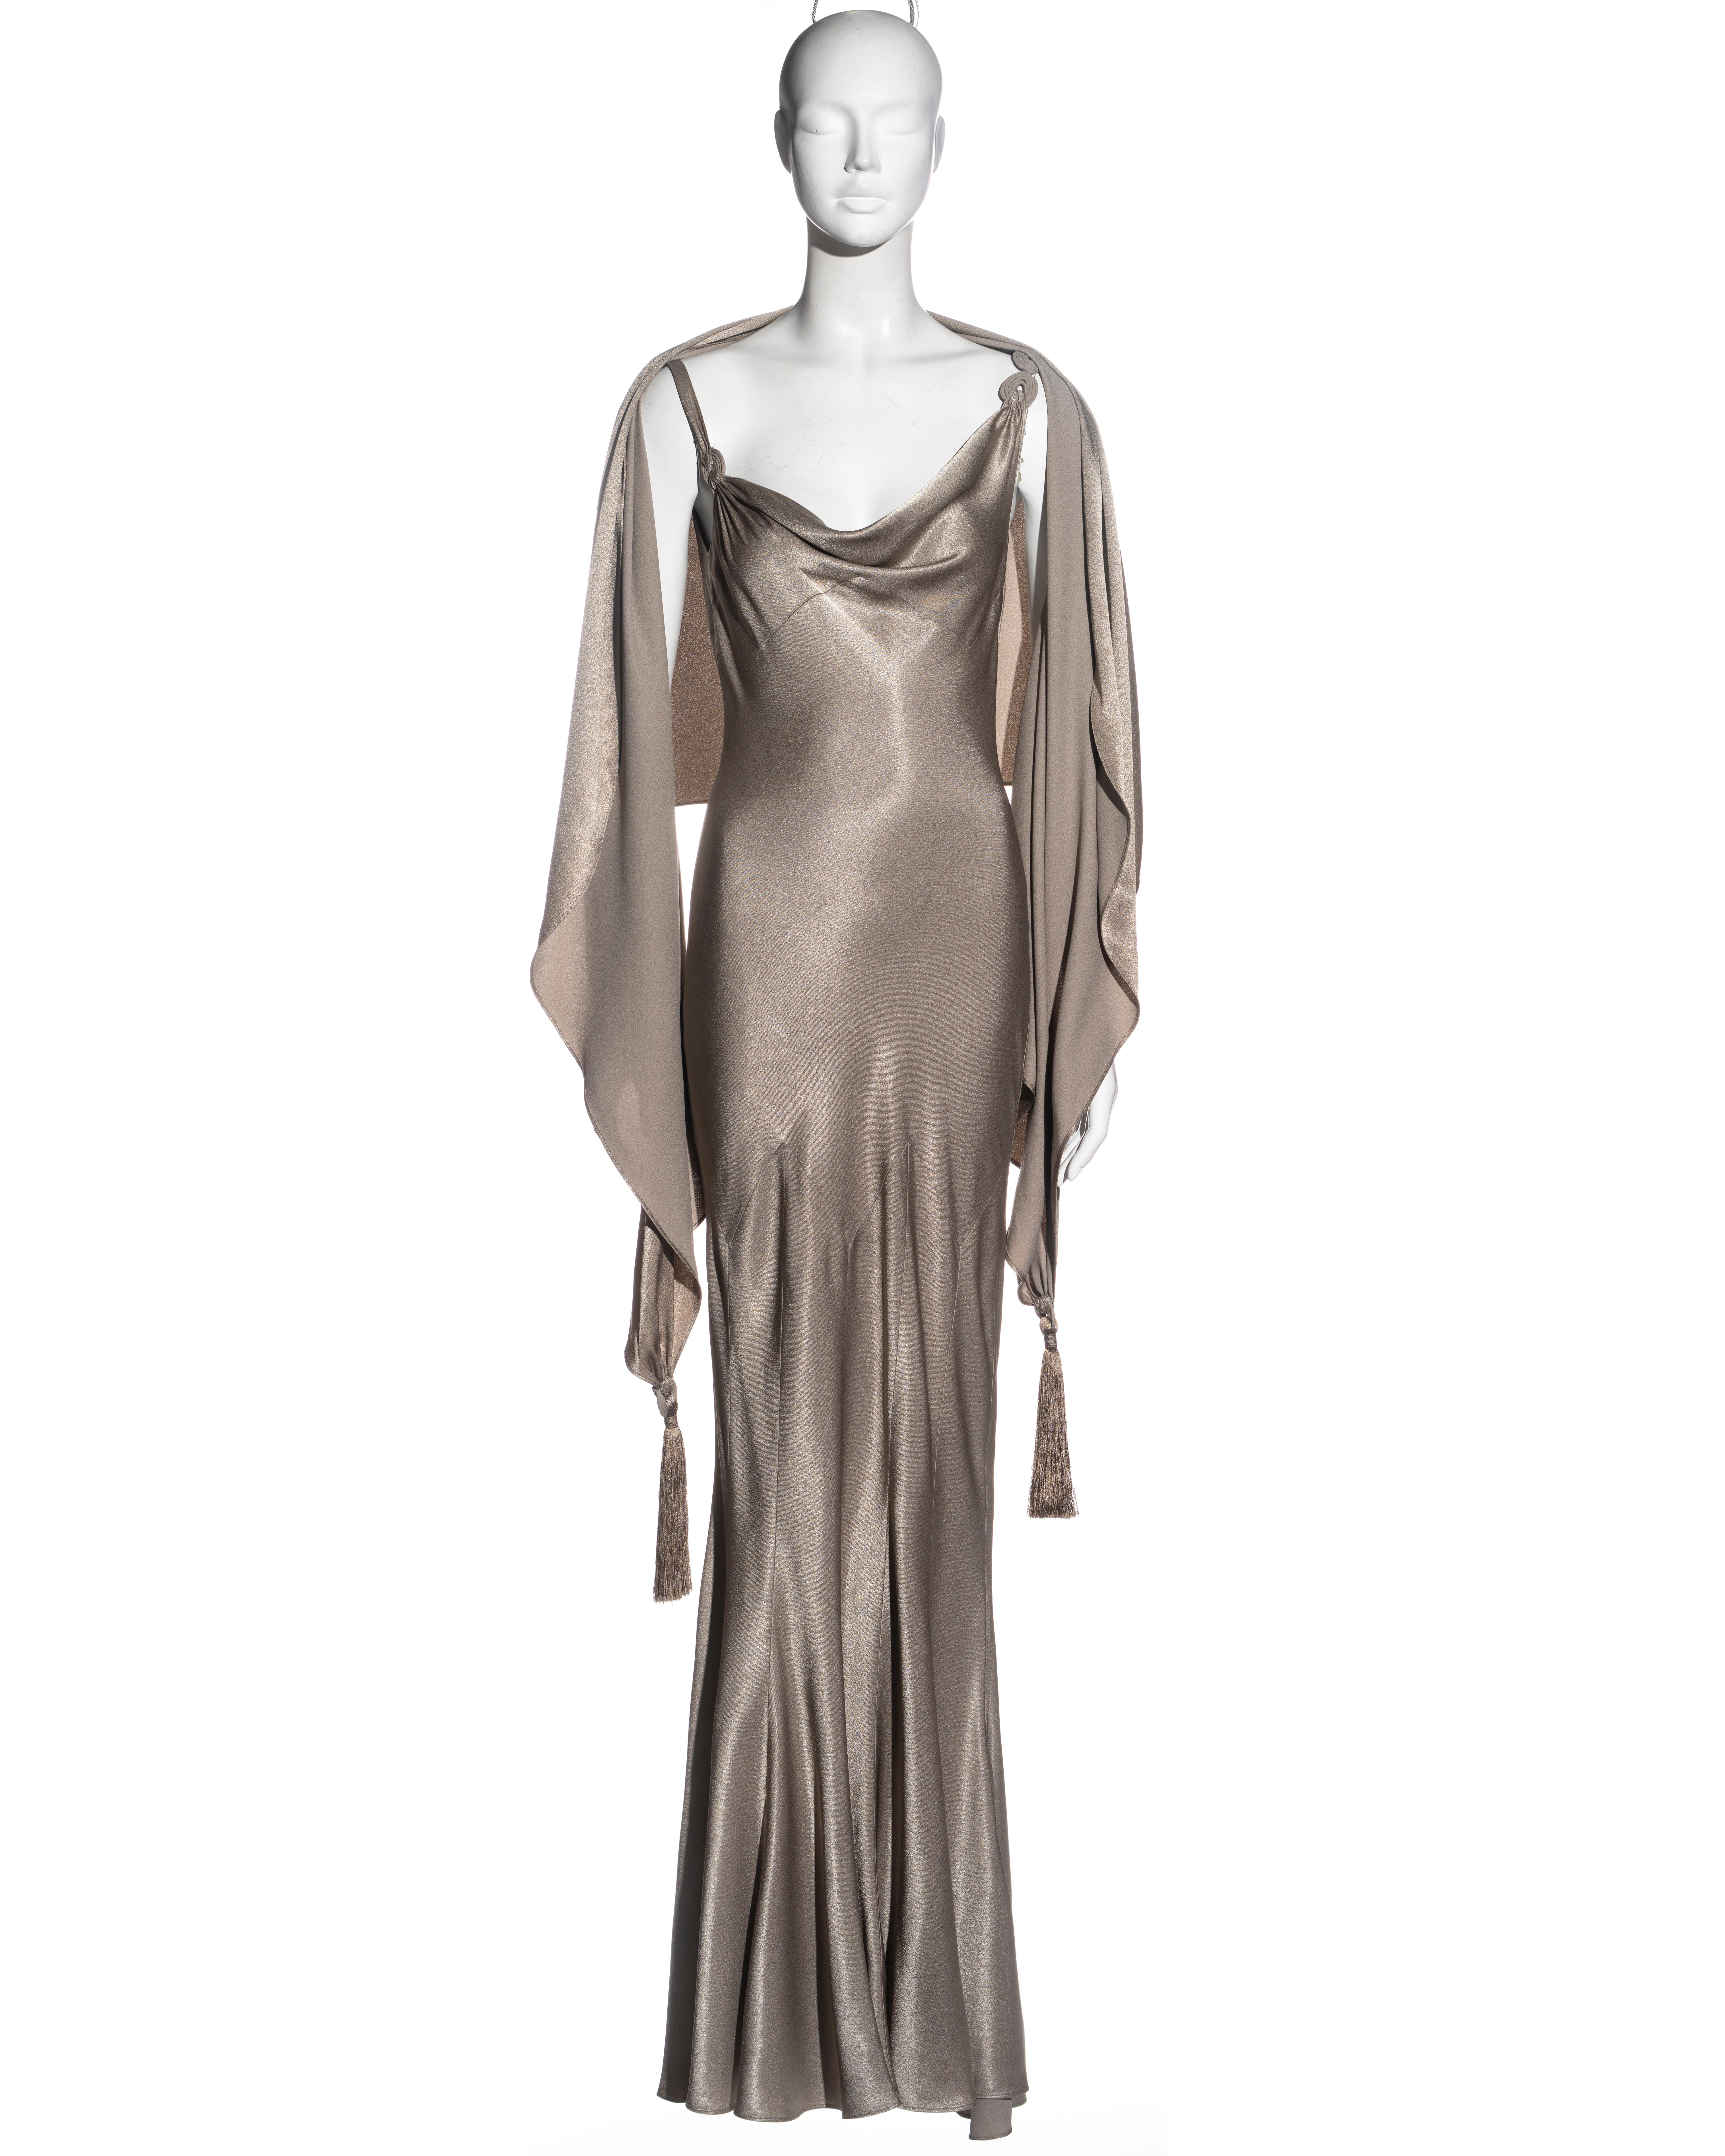 ▪ John Galliano evening dress and shawl 
▪ Taupe crepe satin
▪ Asymmetric cowl neck 
▪ Bias-cut
▪ Multi-panelled floor-length skirt 
▪ Matching shawl with thread tassels 
▪ FR 38 - UK 10 - US 4
▪ Spring-Summer 2000
▪ 68% Acetate, 32% Viscose 
▪ Made